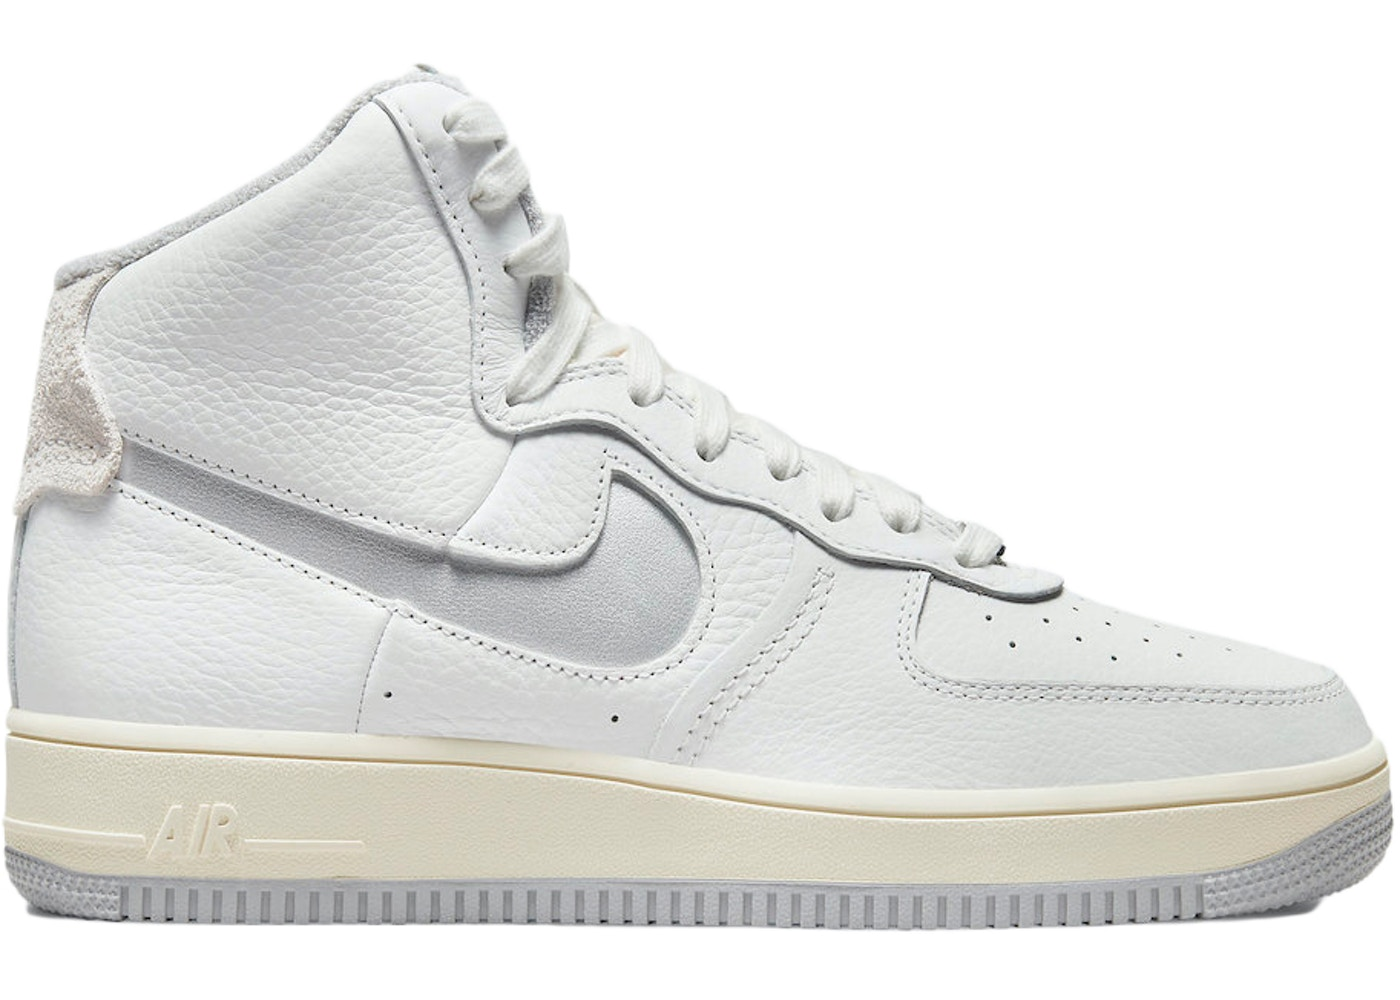 Now Available: Nike Air Force 1 Sculpt (W) 